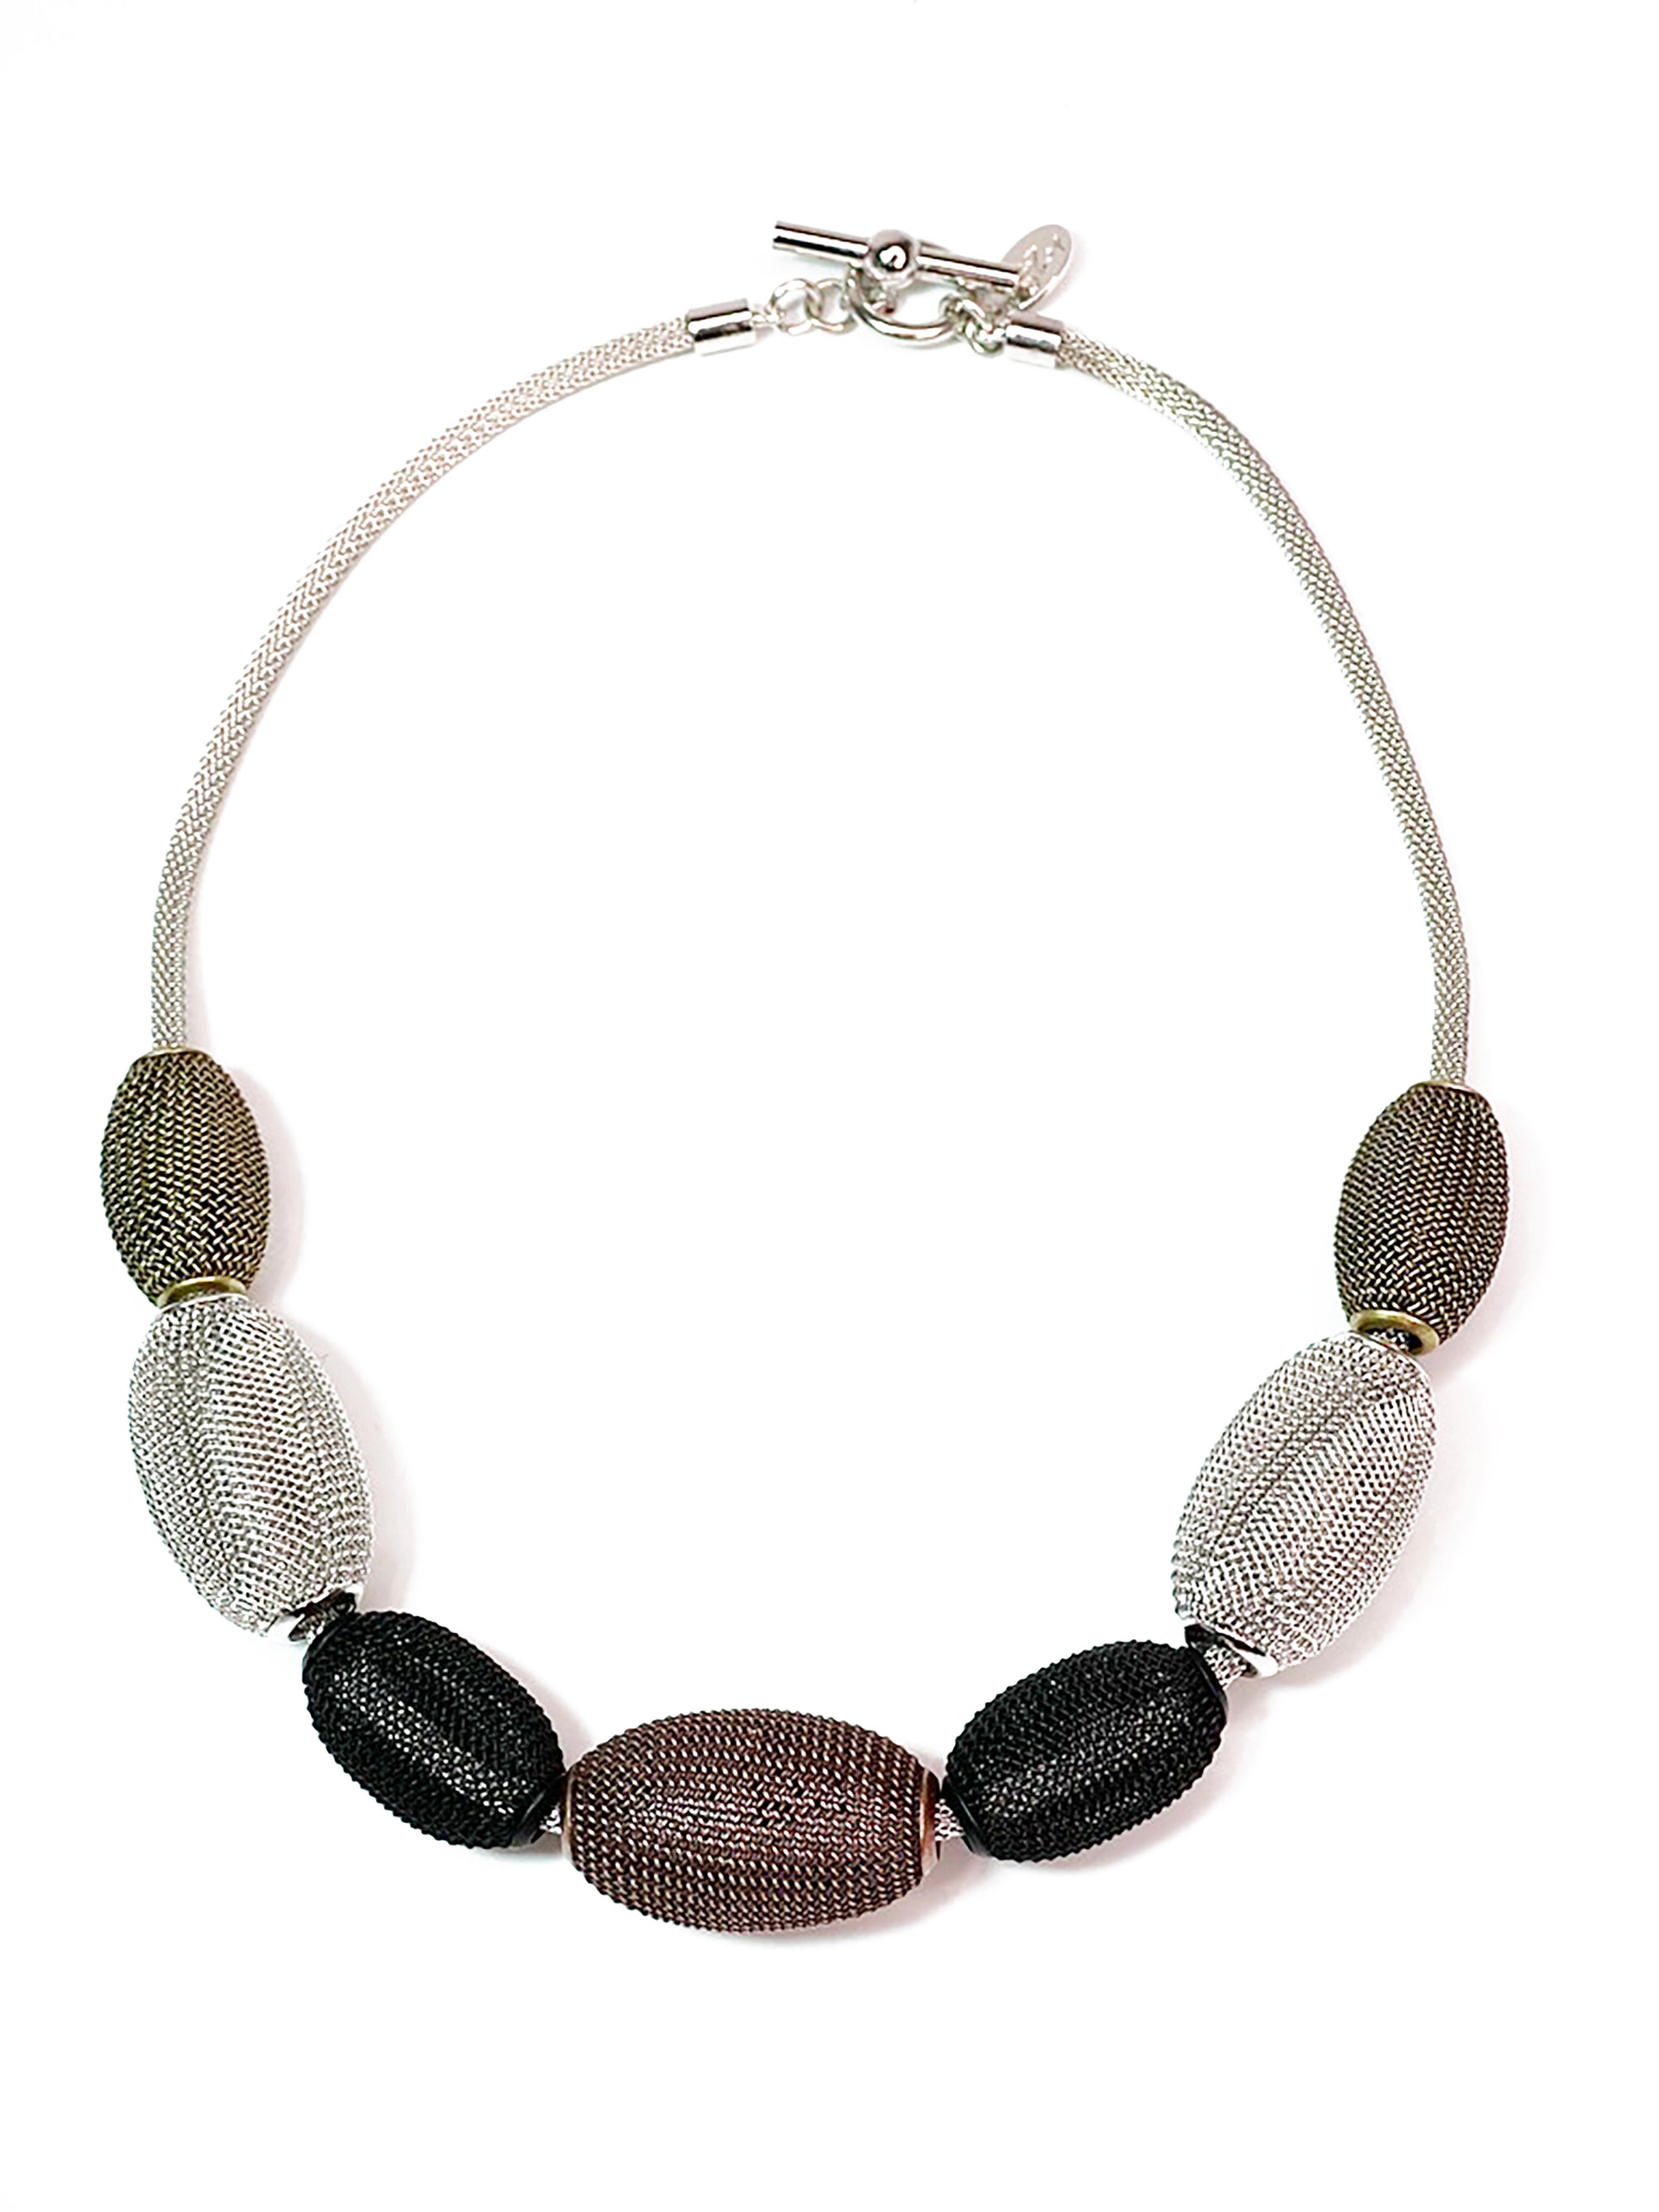 Large Oval Mesh Bead Necklace